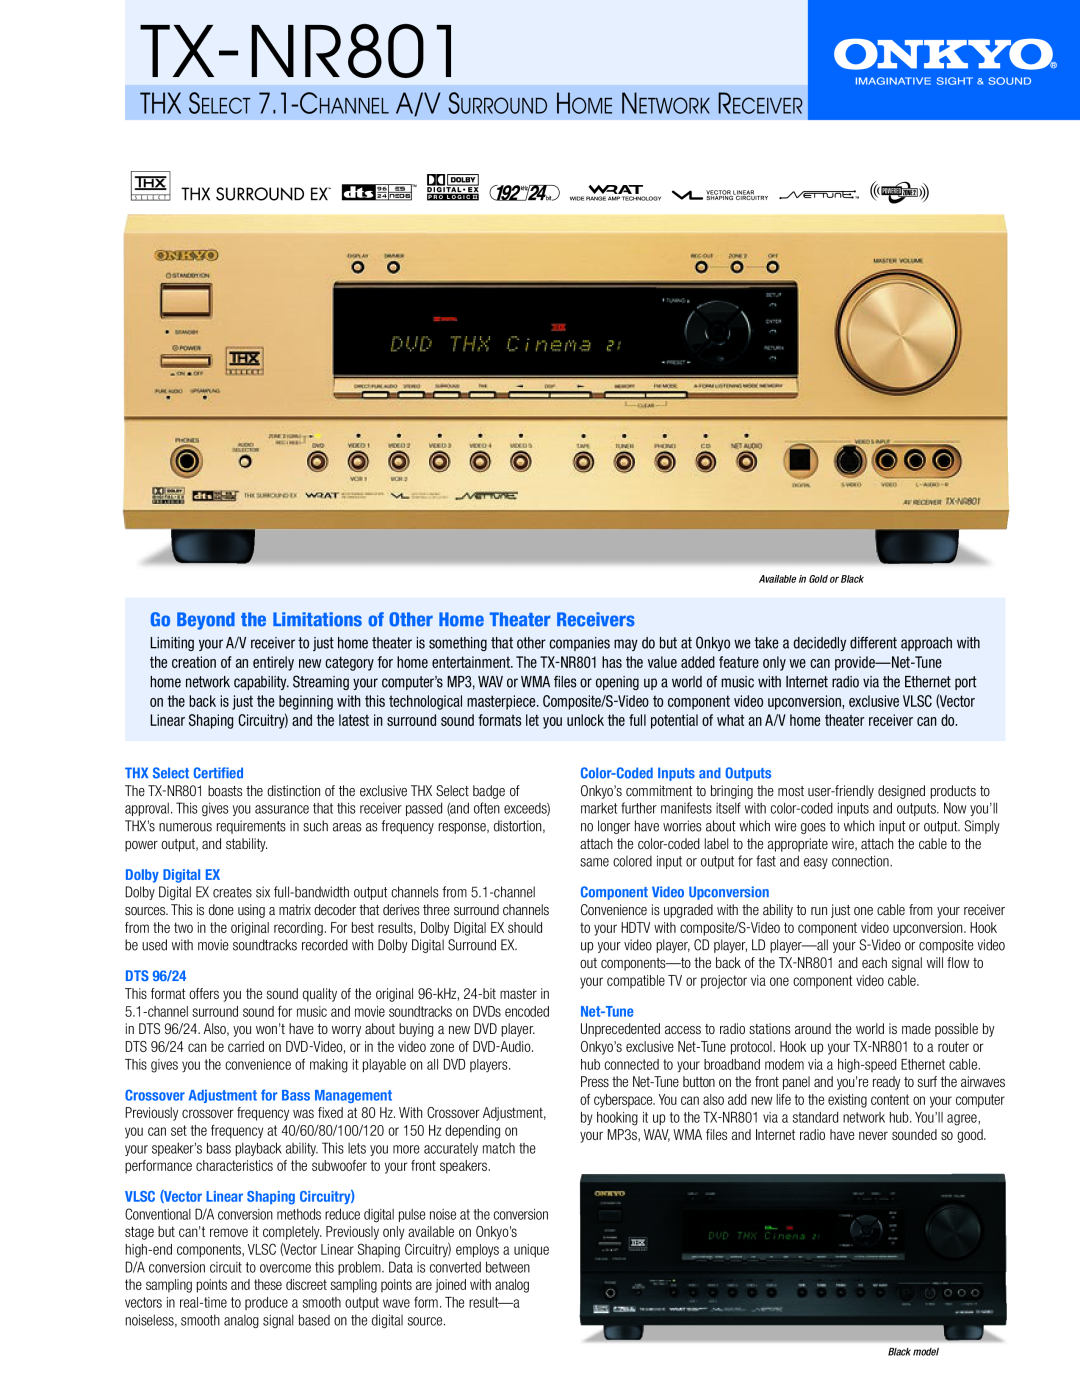 Onkyo TX-NR801 manual THX Select Certified, Dolby Digital EX, DTS 96/24, Crossover Adjustment for Bass Management 